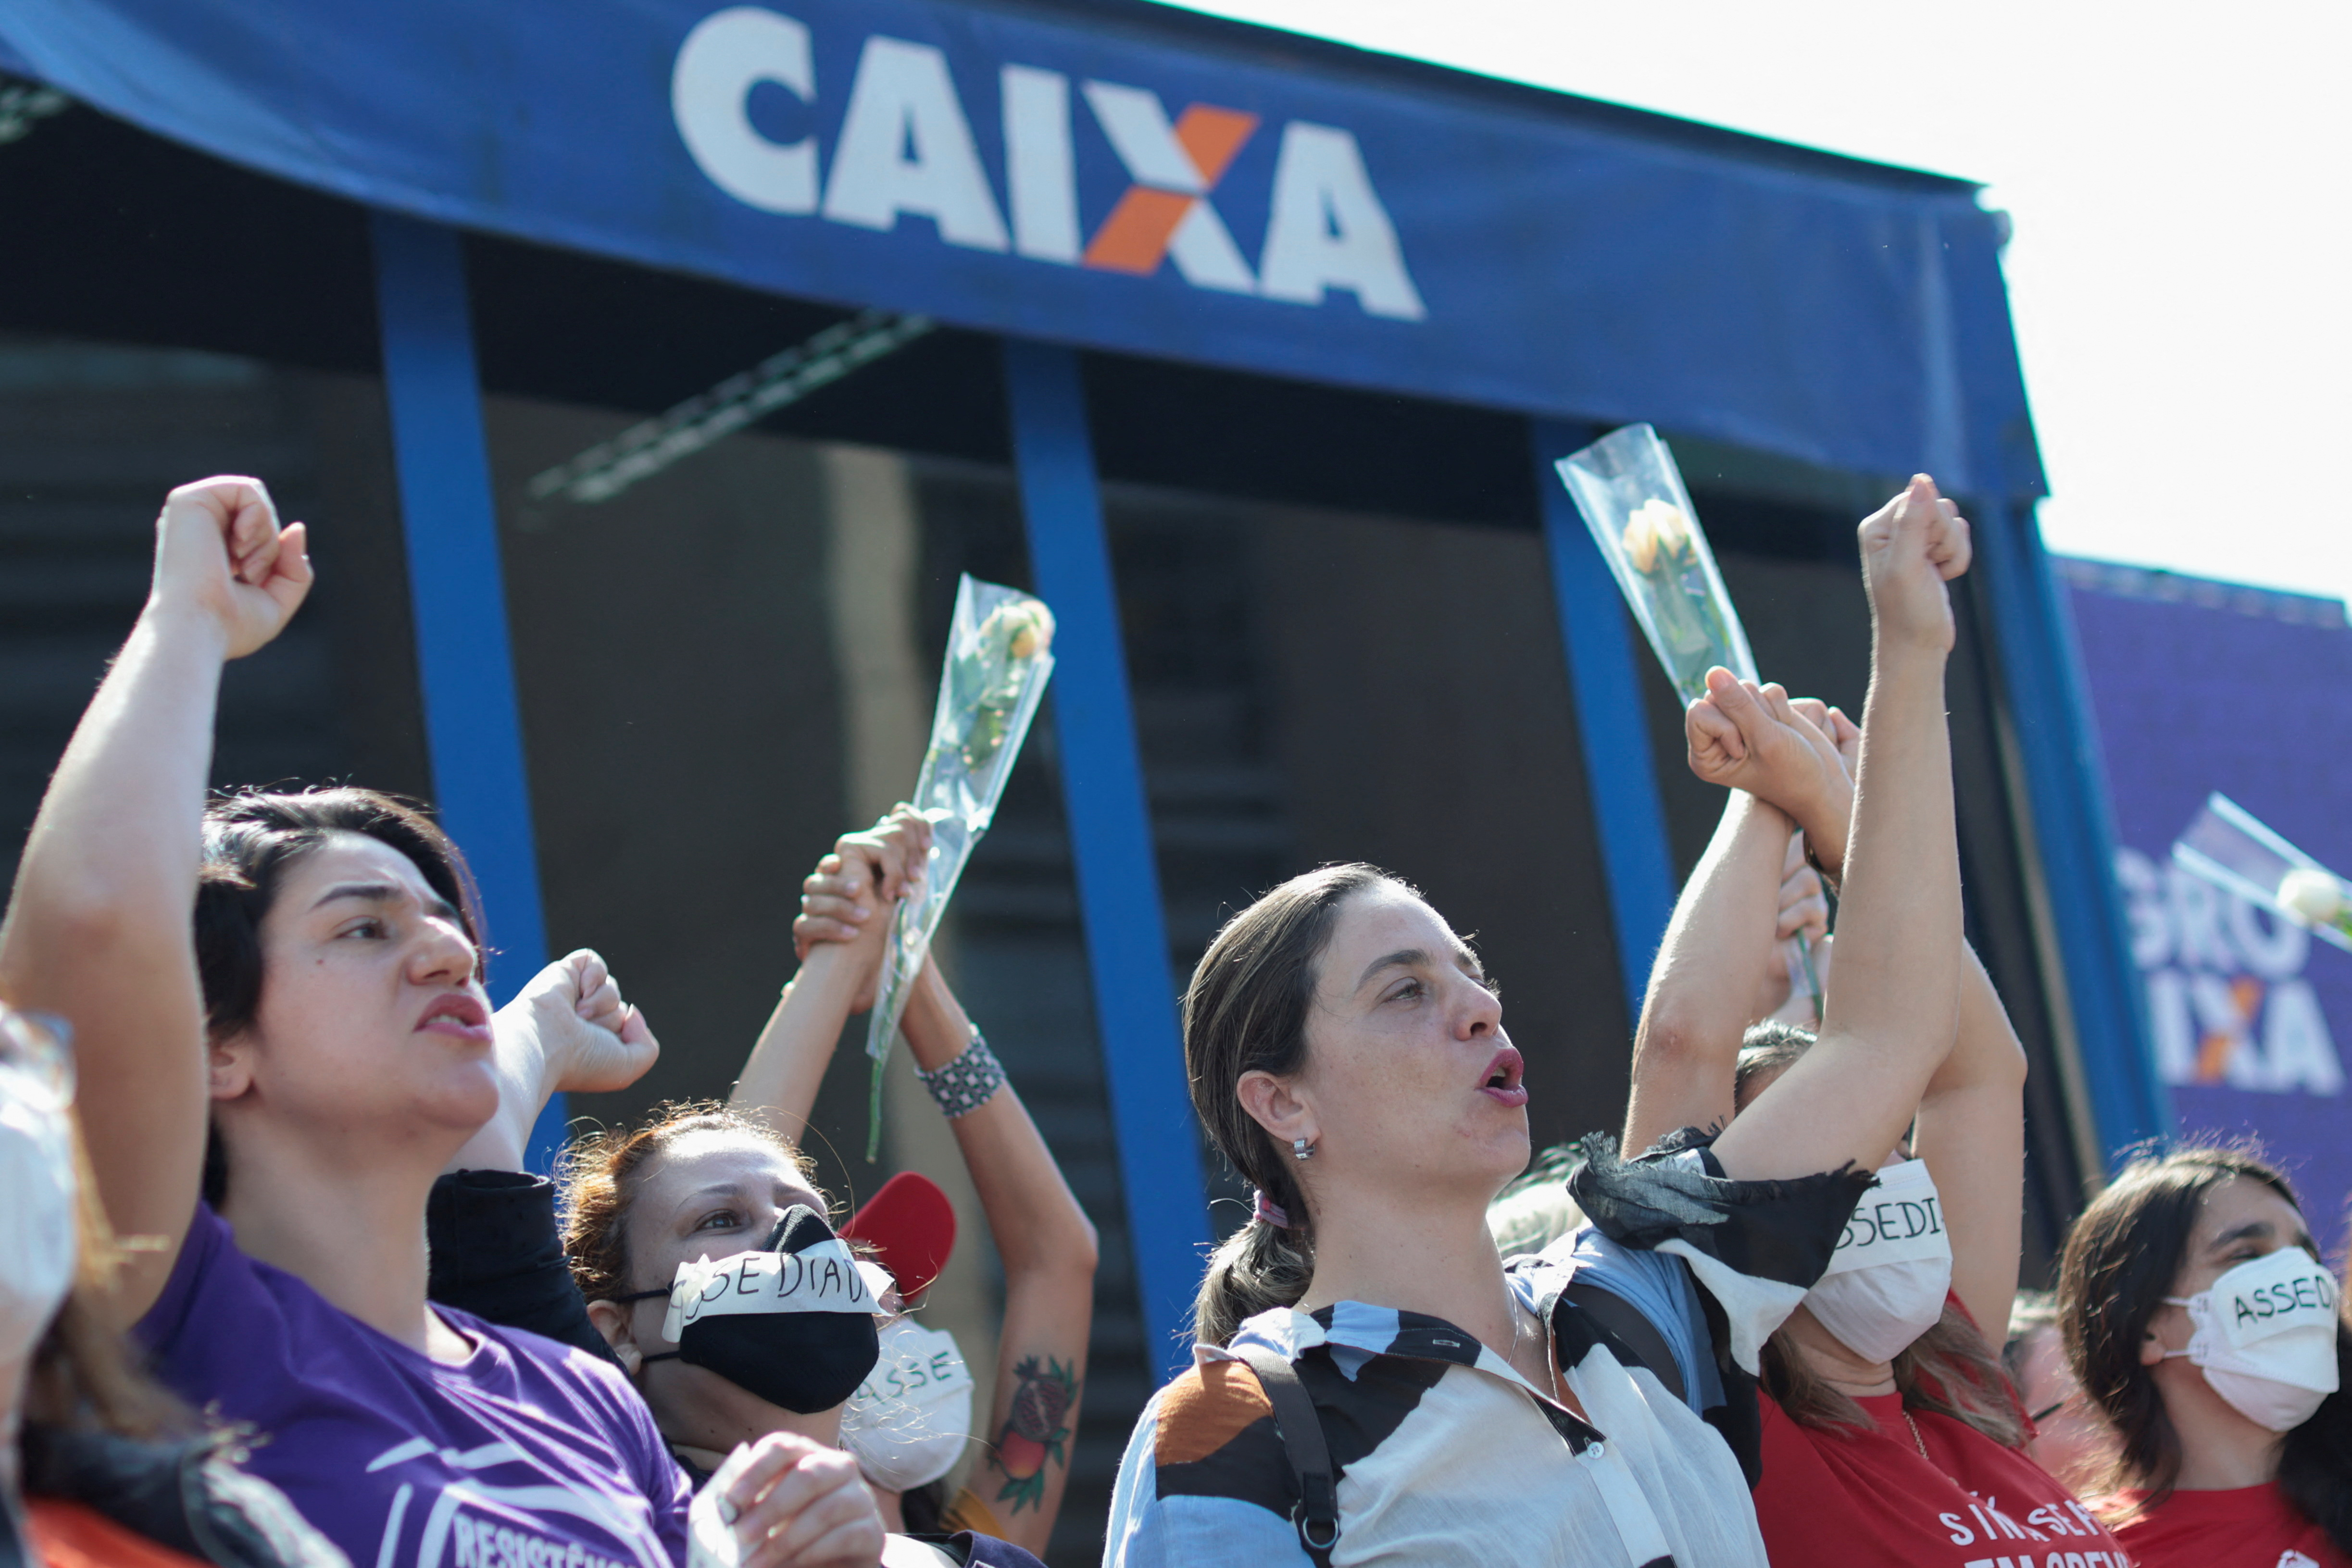 Protest against the president of the Caixa Economica Federal bank, Pedro Guimaraes after allegations of sexual harassment